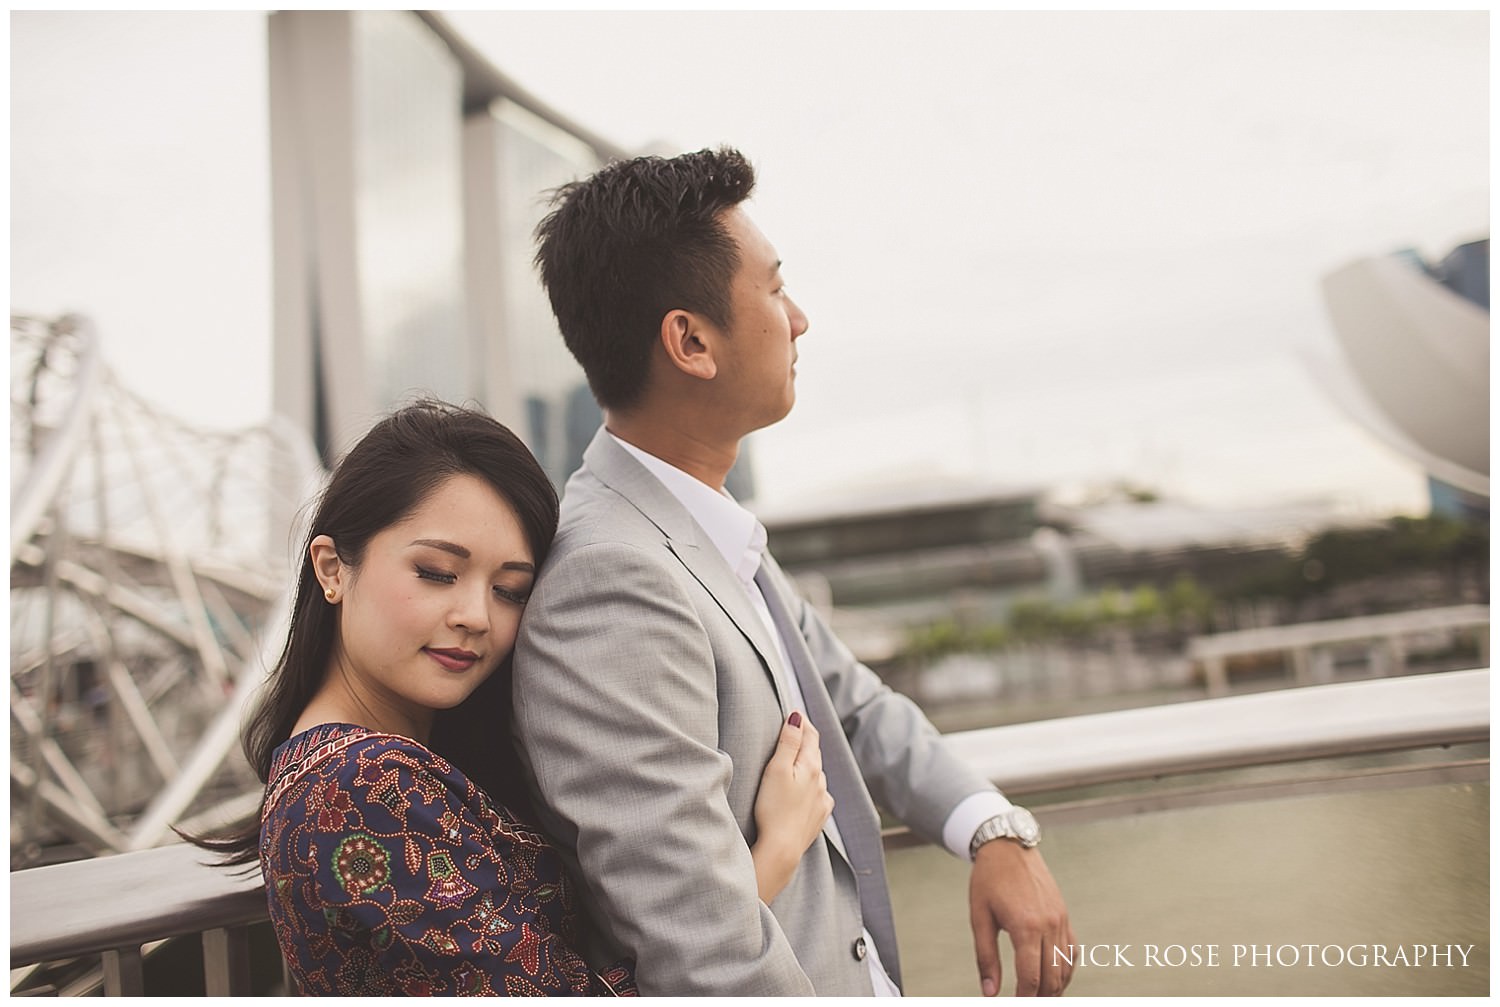  Woman holding her fiance during a romantic pre wedding photography shoot at Marina Bay in Singapore 